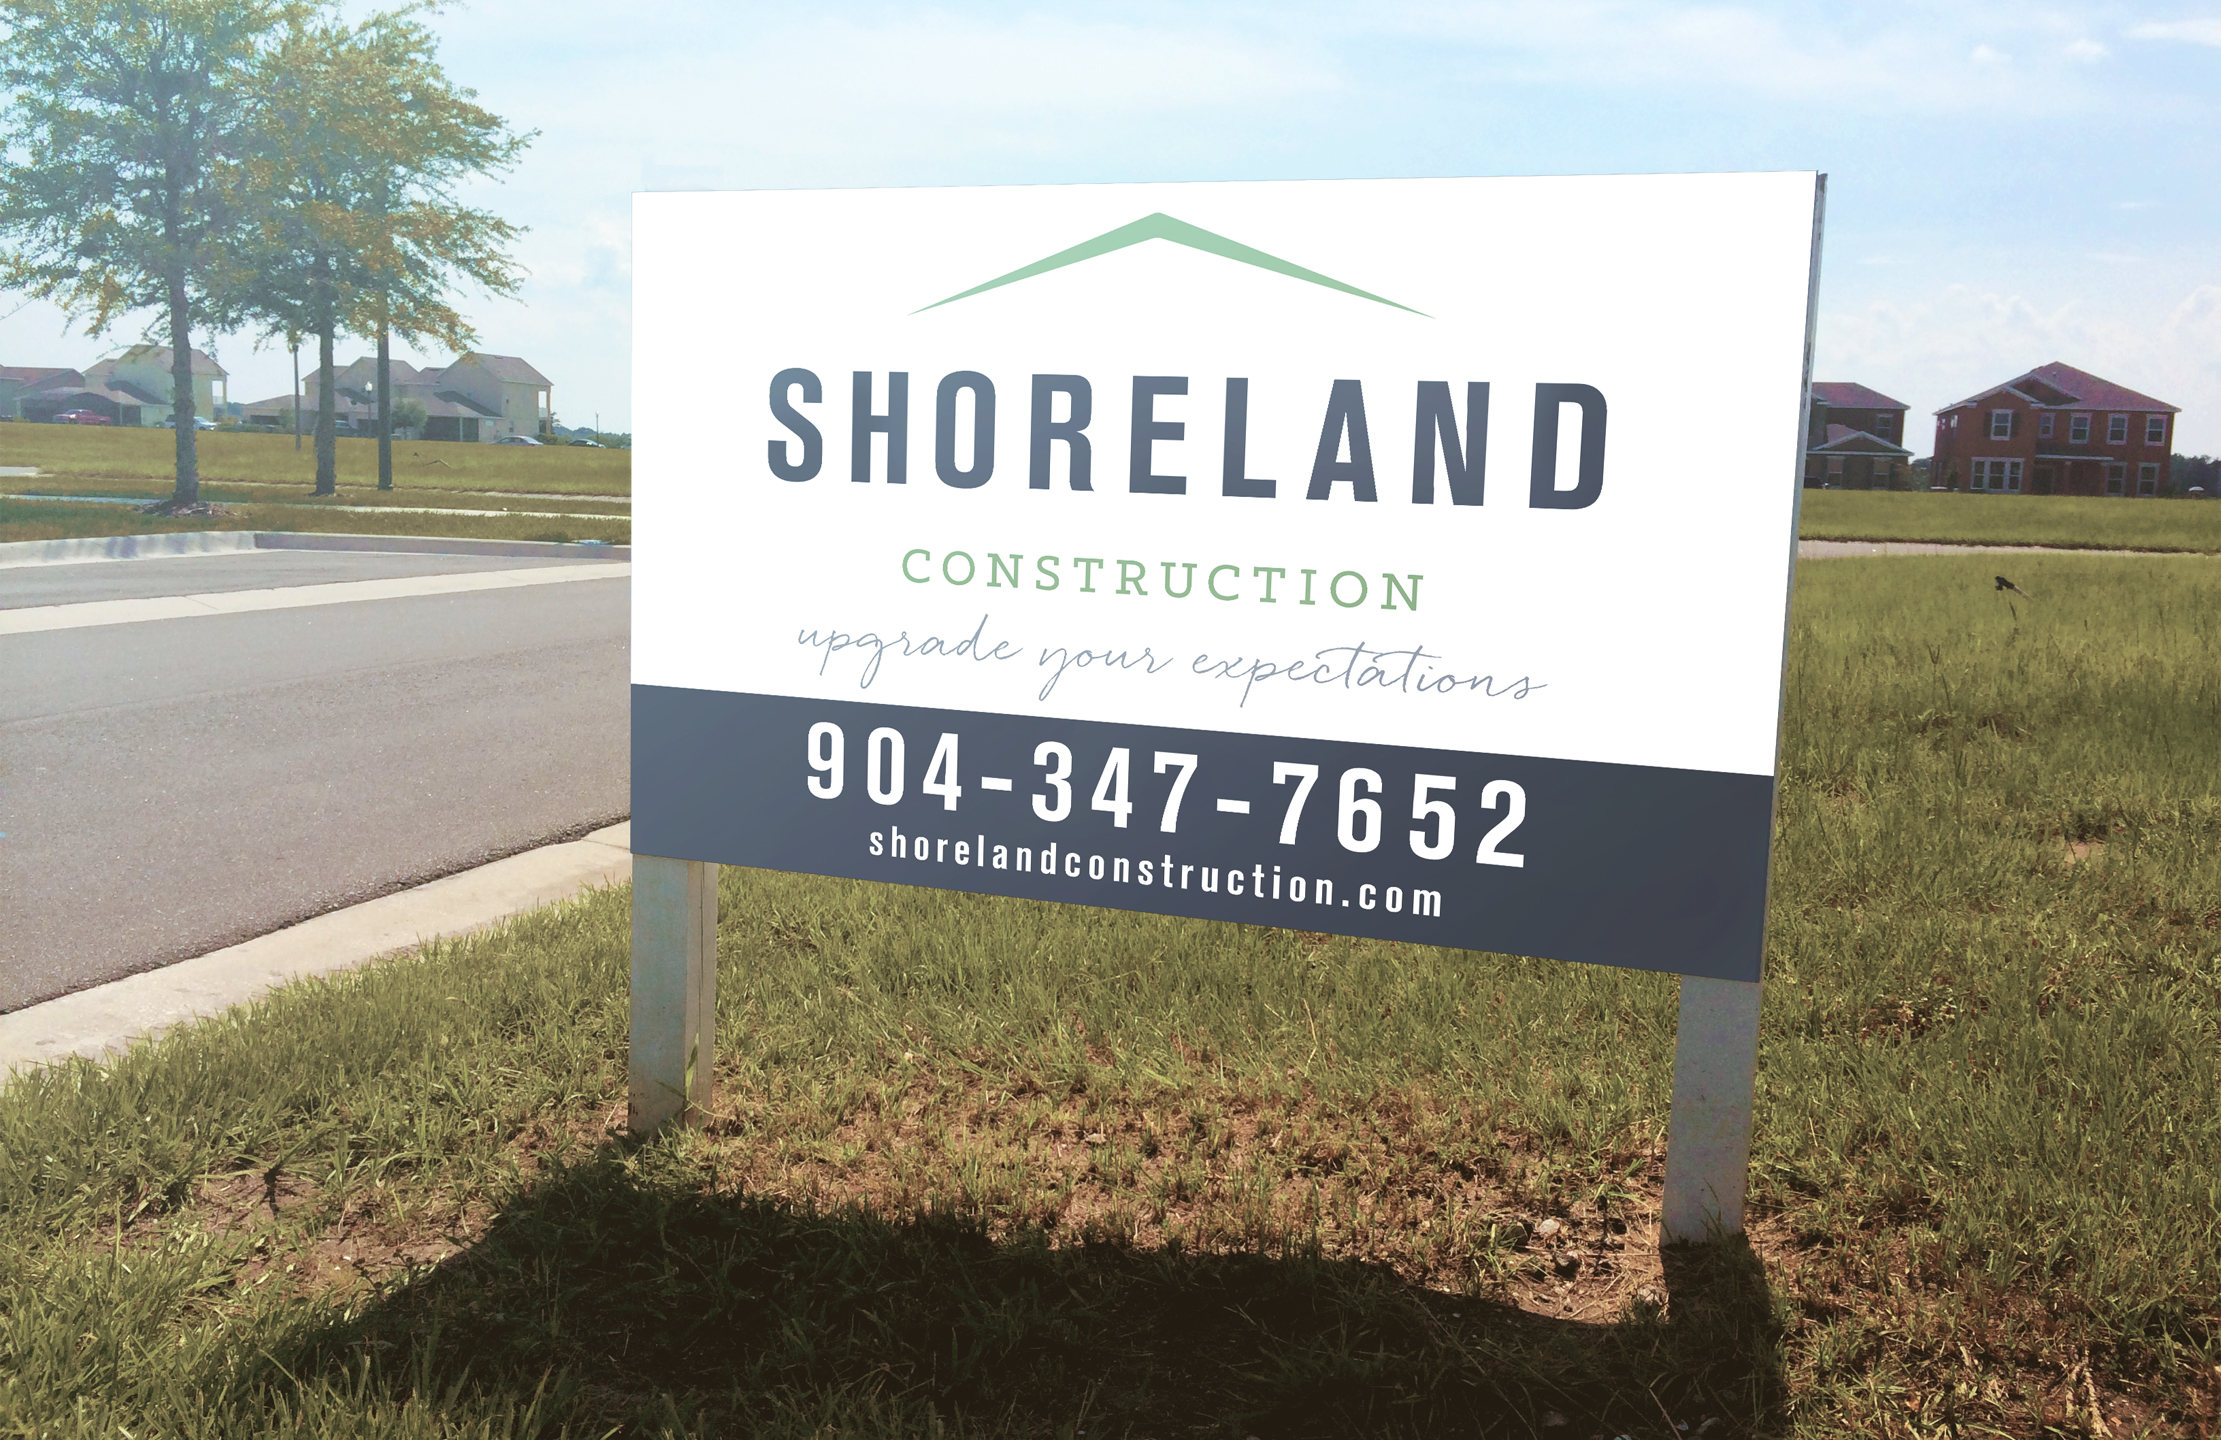 Shoreland Construction Branding Yard Sign Designed by Just Make Things